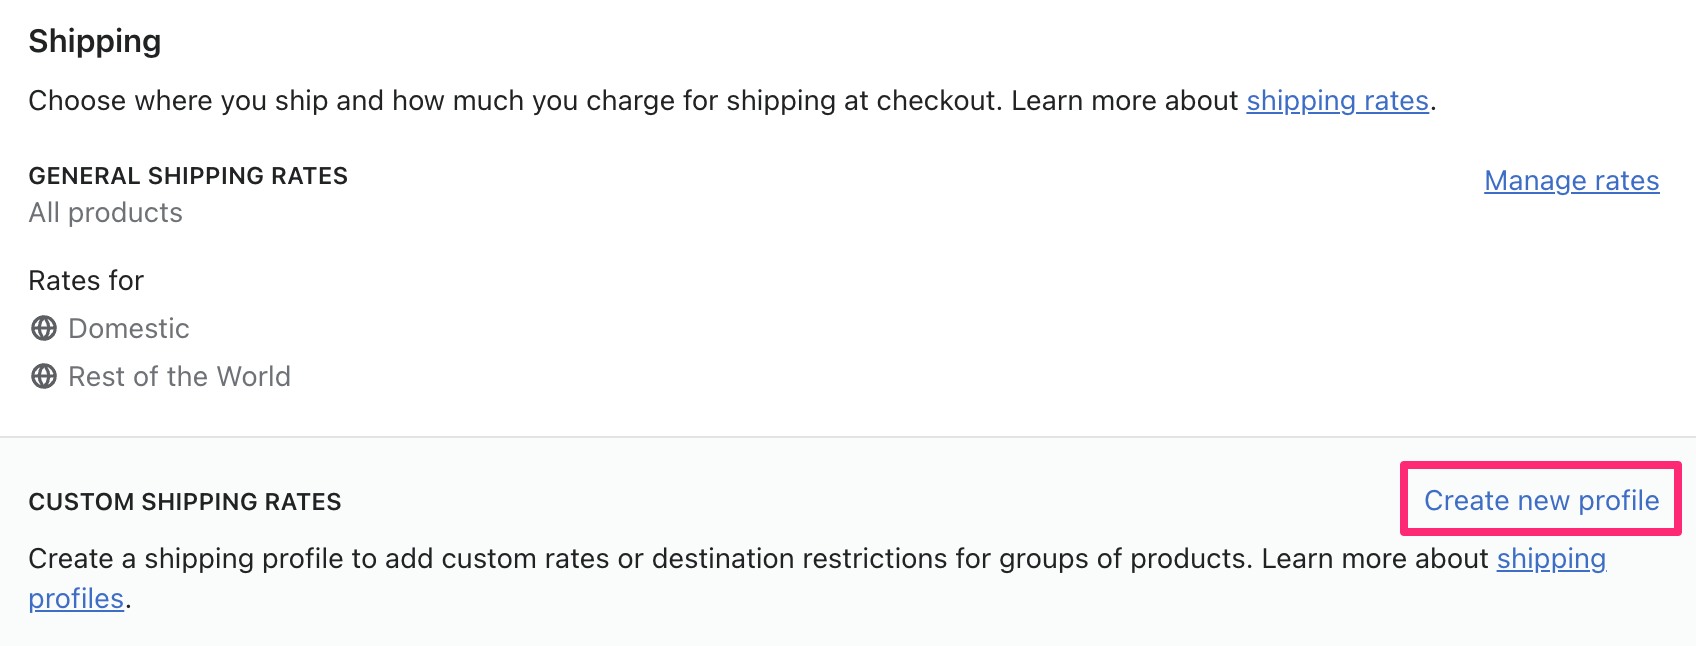 Create_new_shipping_profile_in_Shopify.png